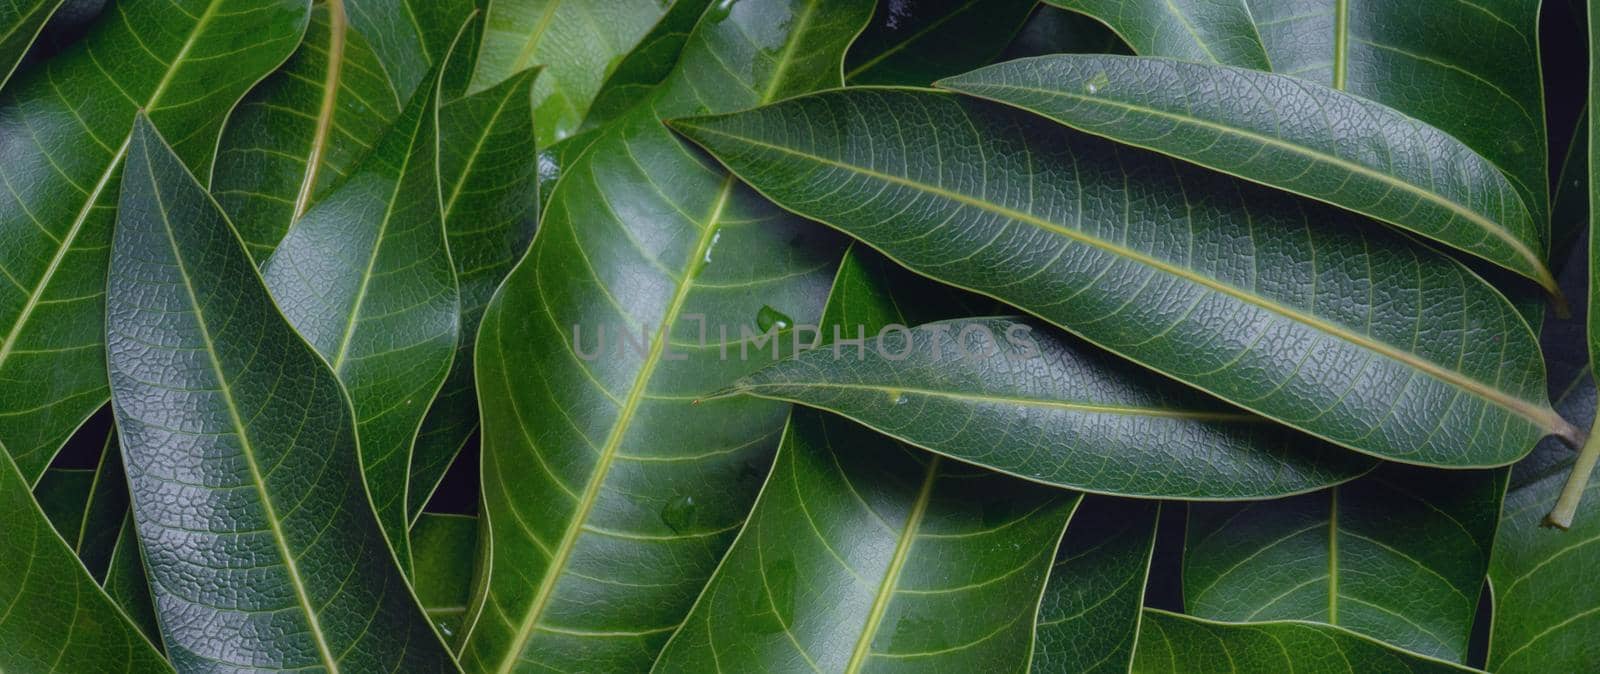 Mango leaves background, beautiful fresh green group with clear leaf vein texture detail, copy space, top view, close up, macro. Tropical concept. by ROMIXIMAGE